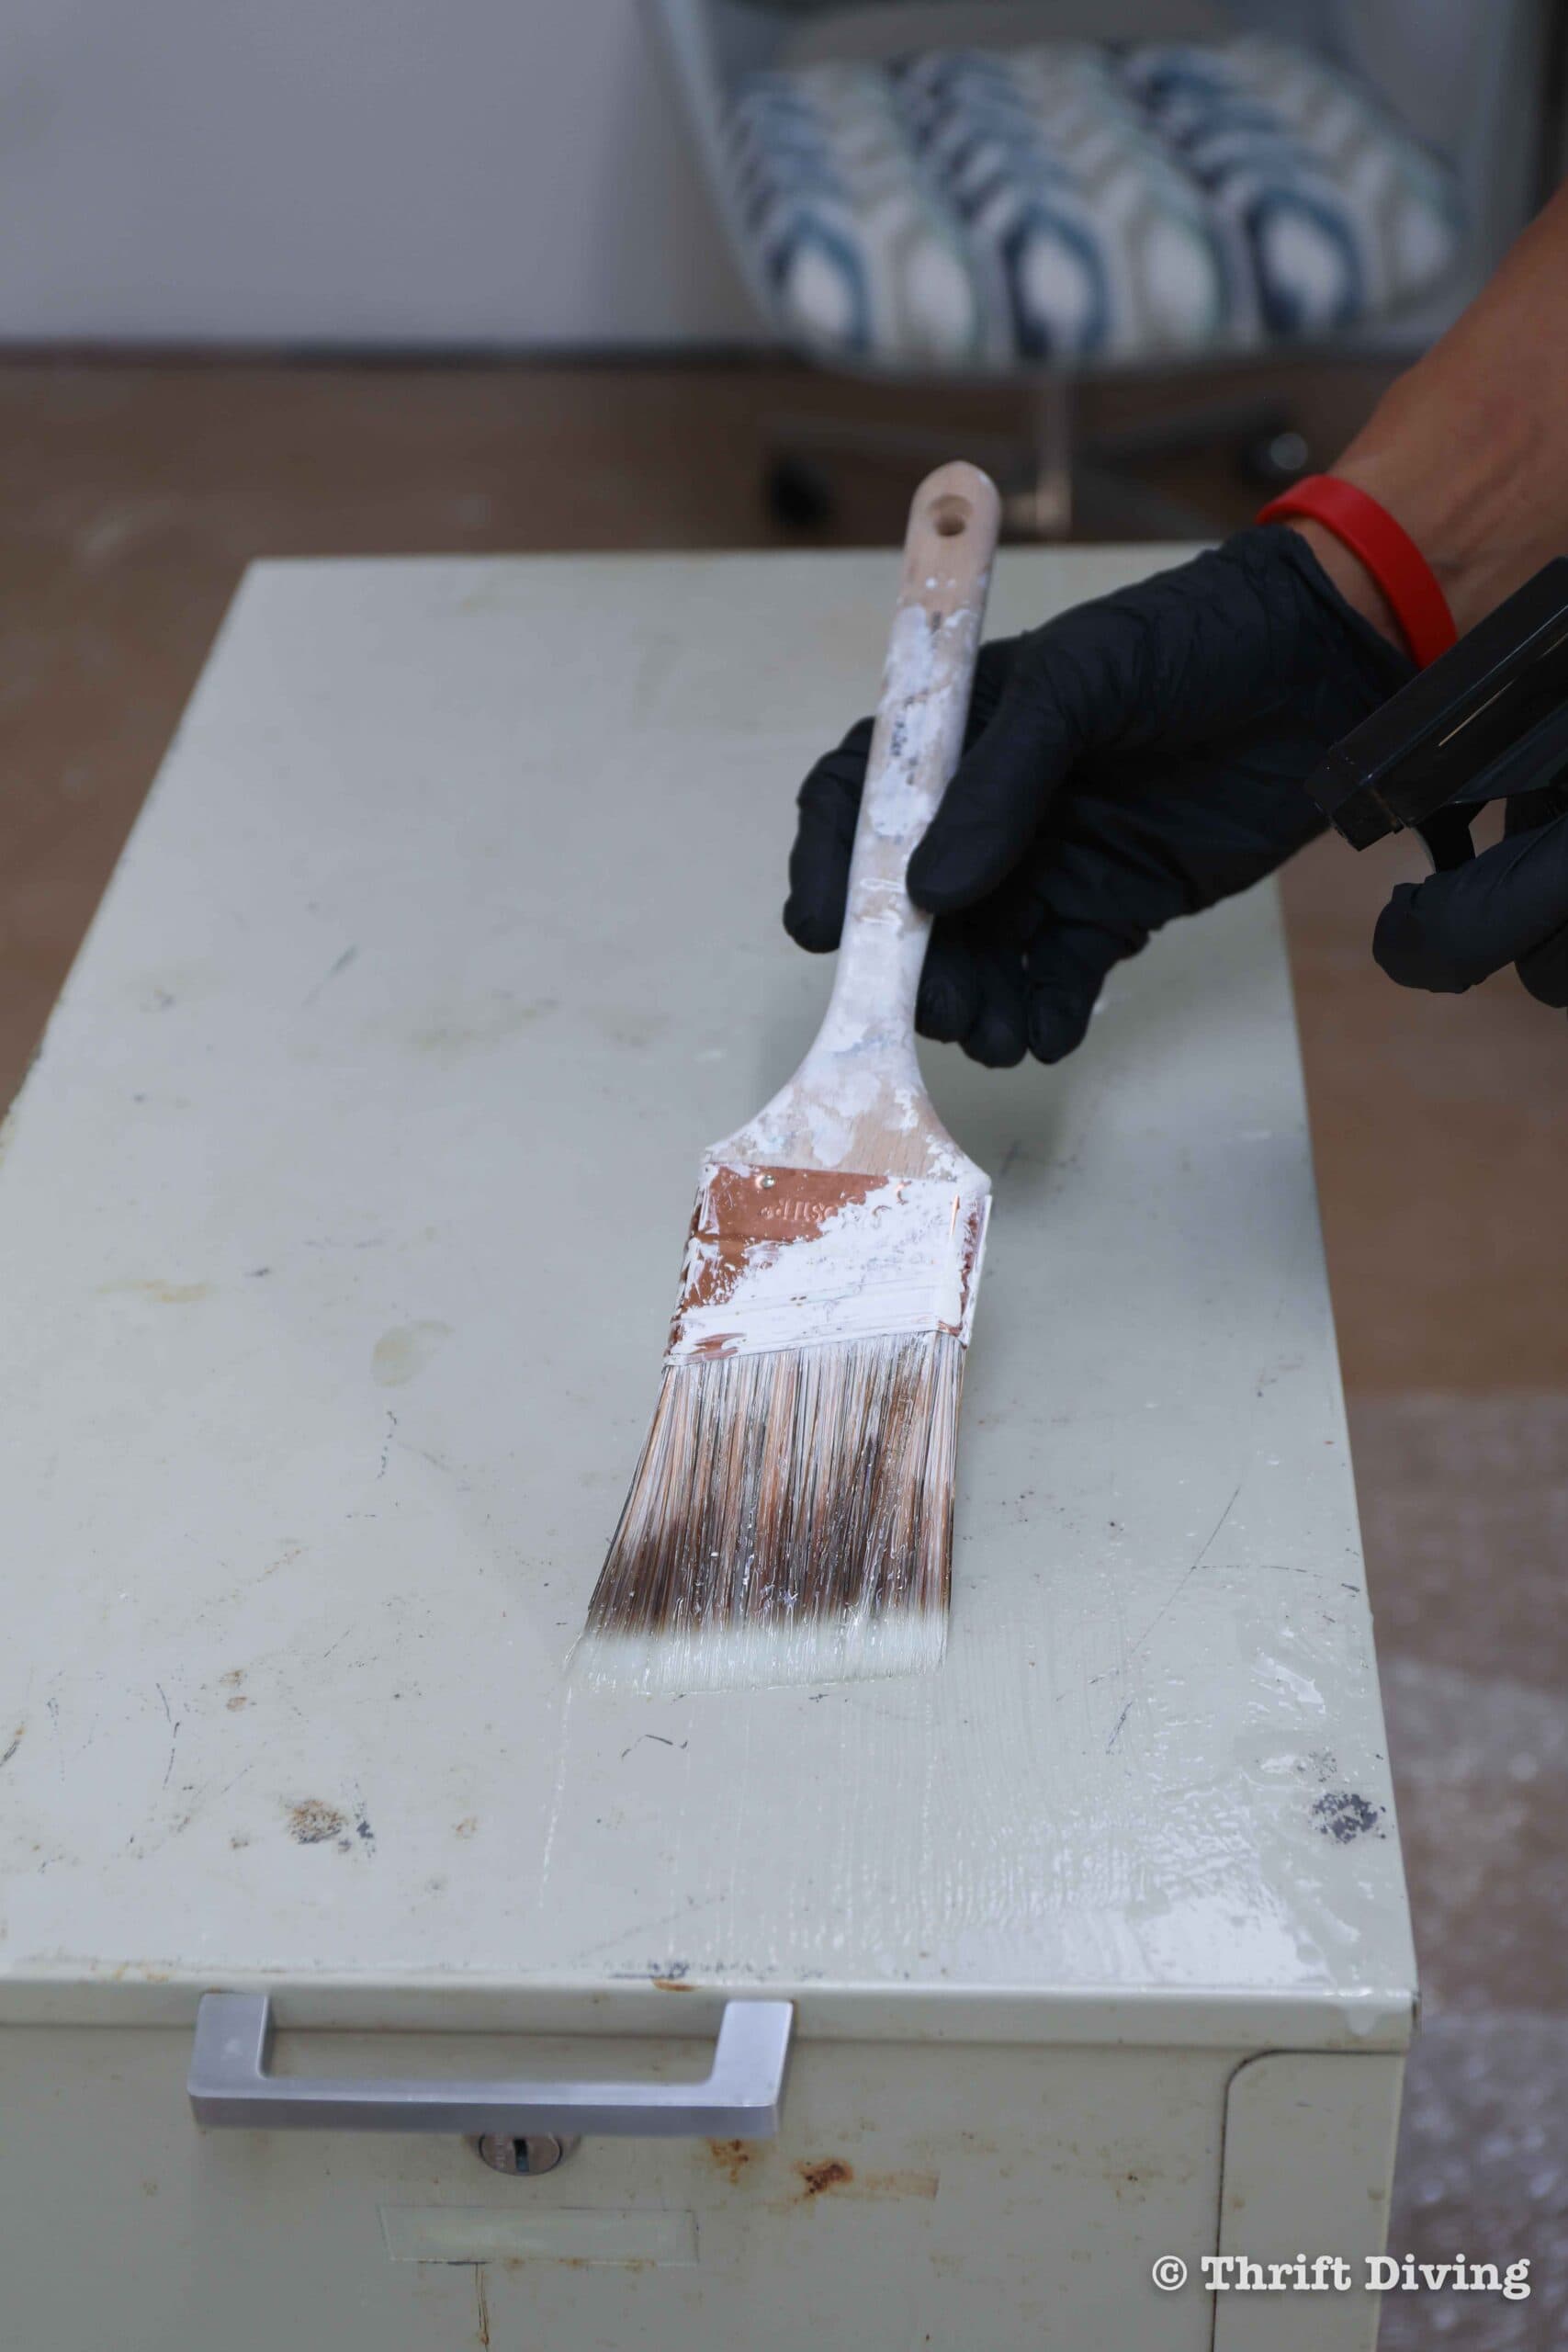 How to Paint a Metal File Cabinet - Rust removal gel will remove rust before painting metal. - Thrift Diving